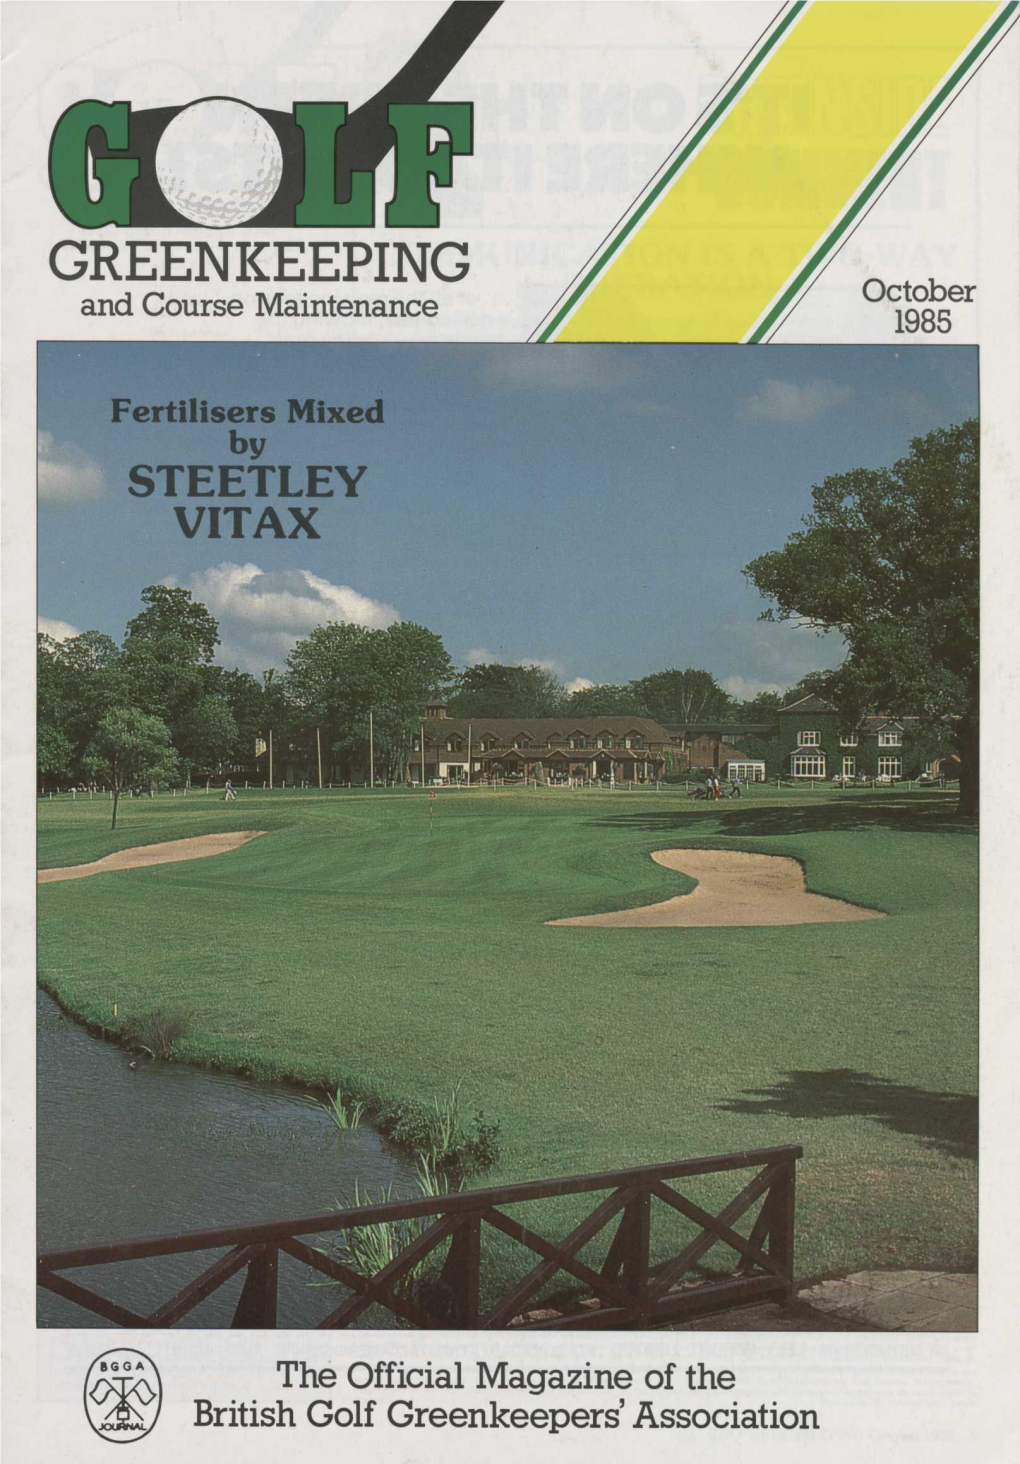 GREENKEEPING and Course Maintenance October 1985